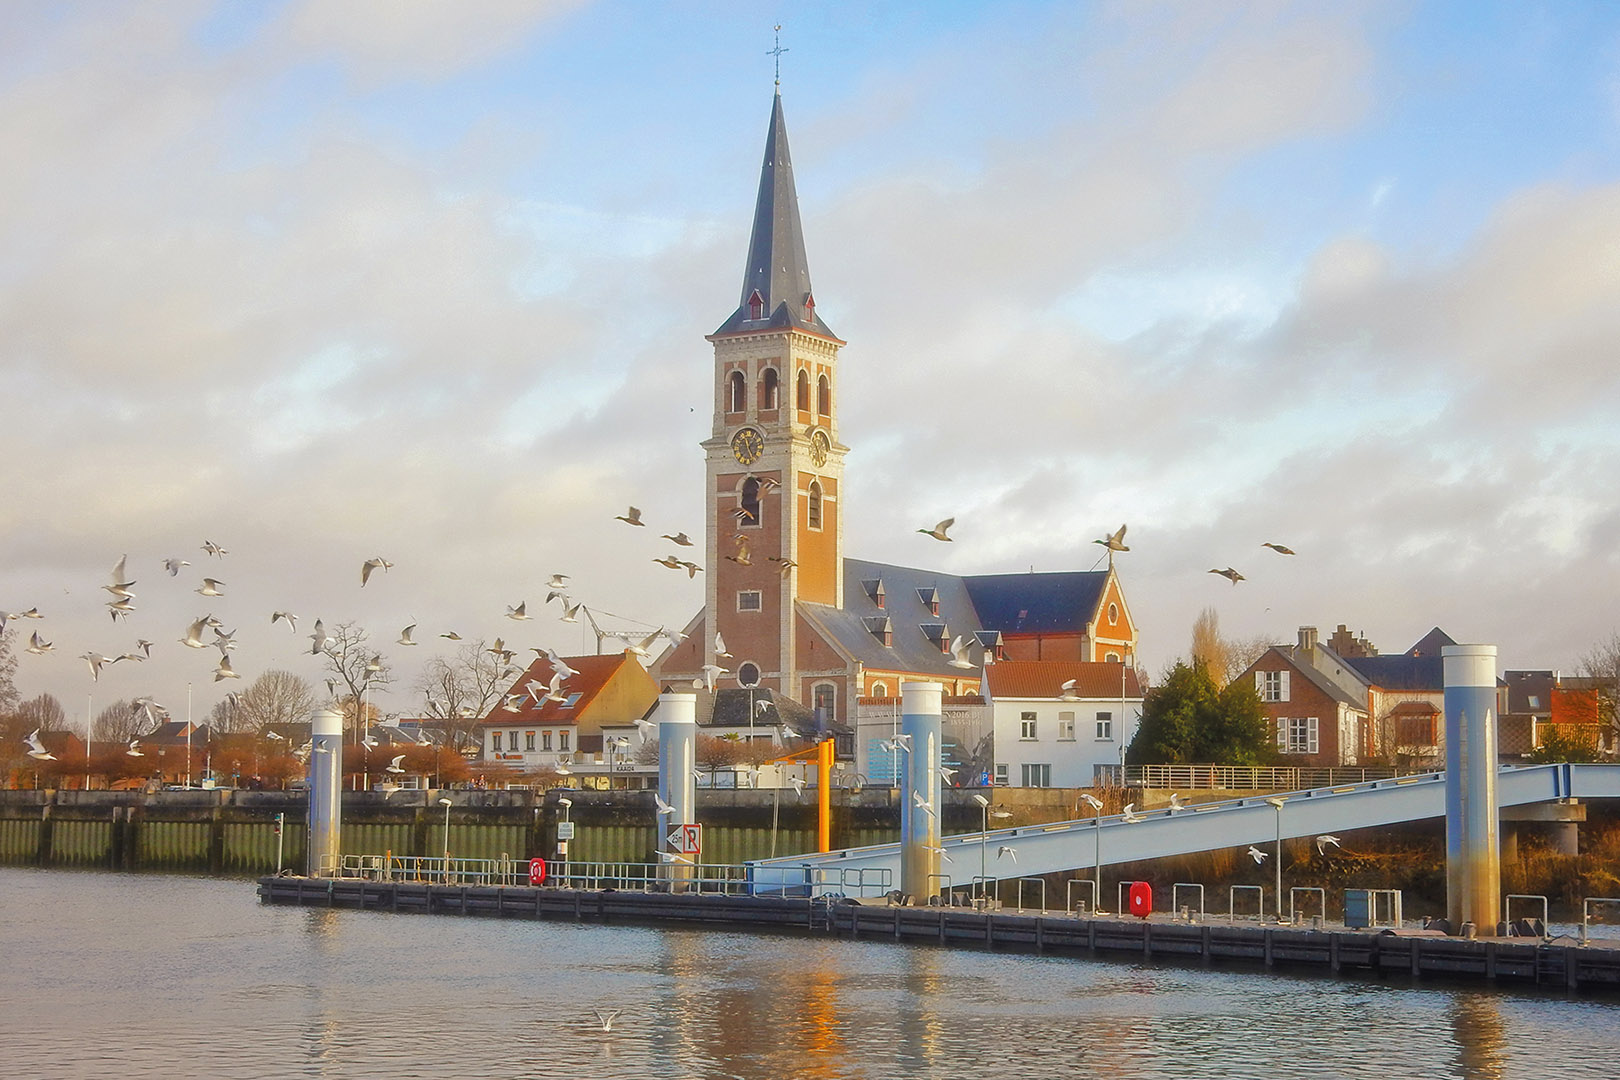 fotoreeks Discover the Scheldeland by boat with visits to Rupelmonde and Sint-Amands, departing from Schellebelle or Dendermonde.